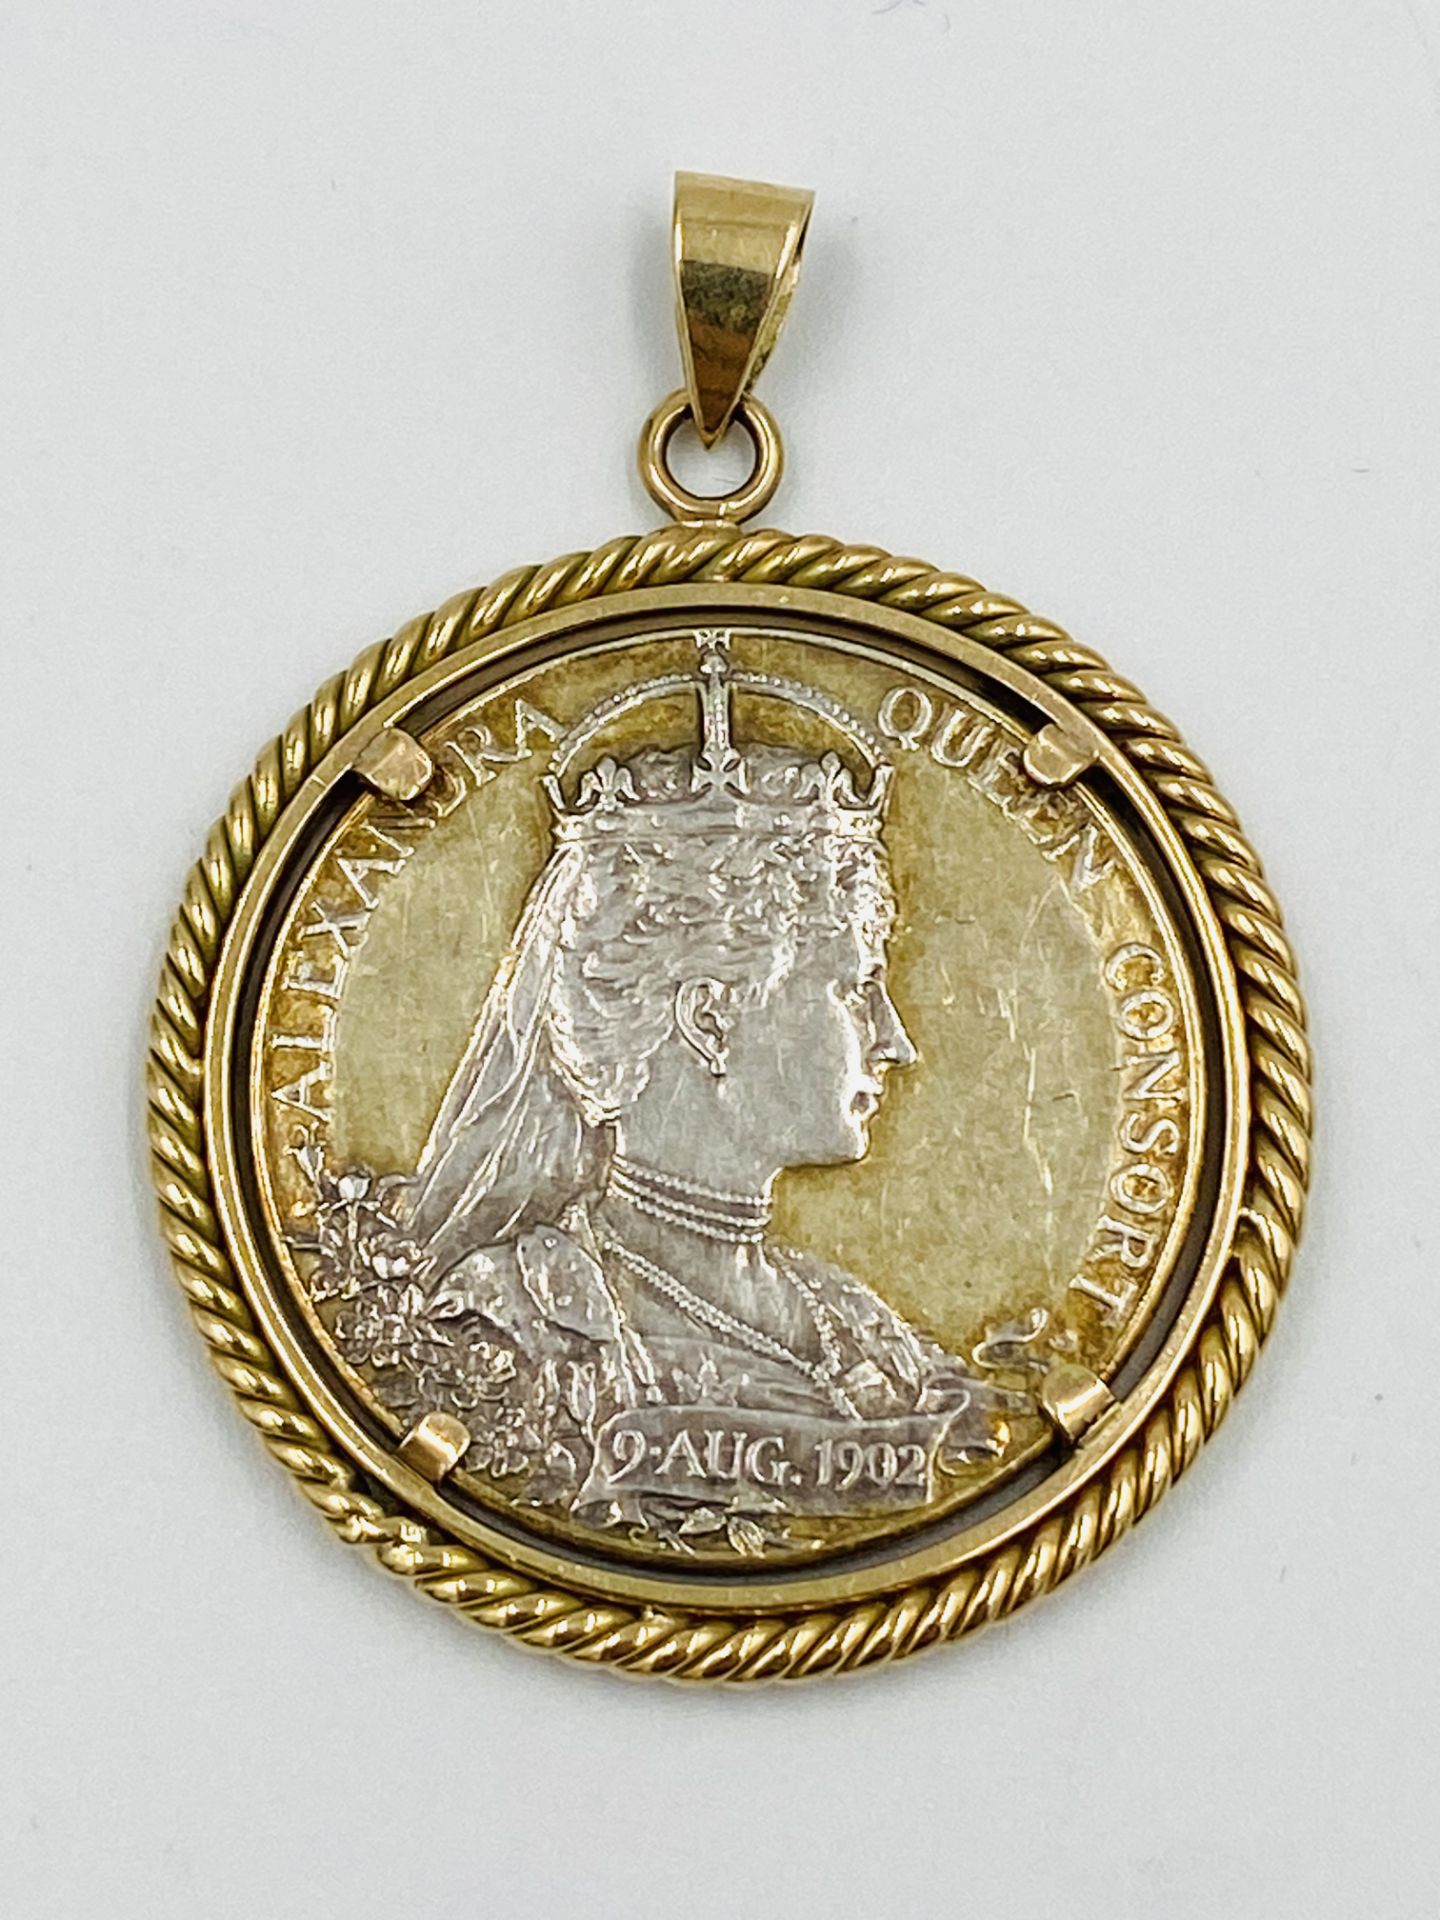 King Edward VII silver coronation medal in 9ct gold pendant - Image 2 of 3